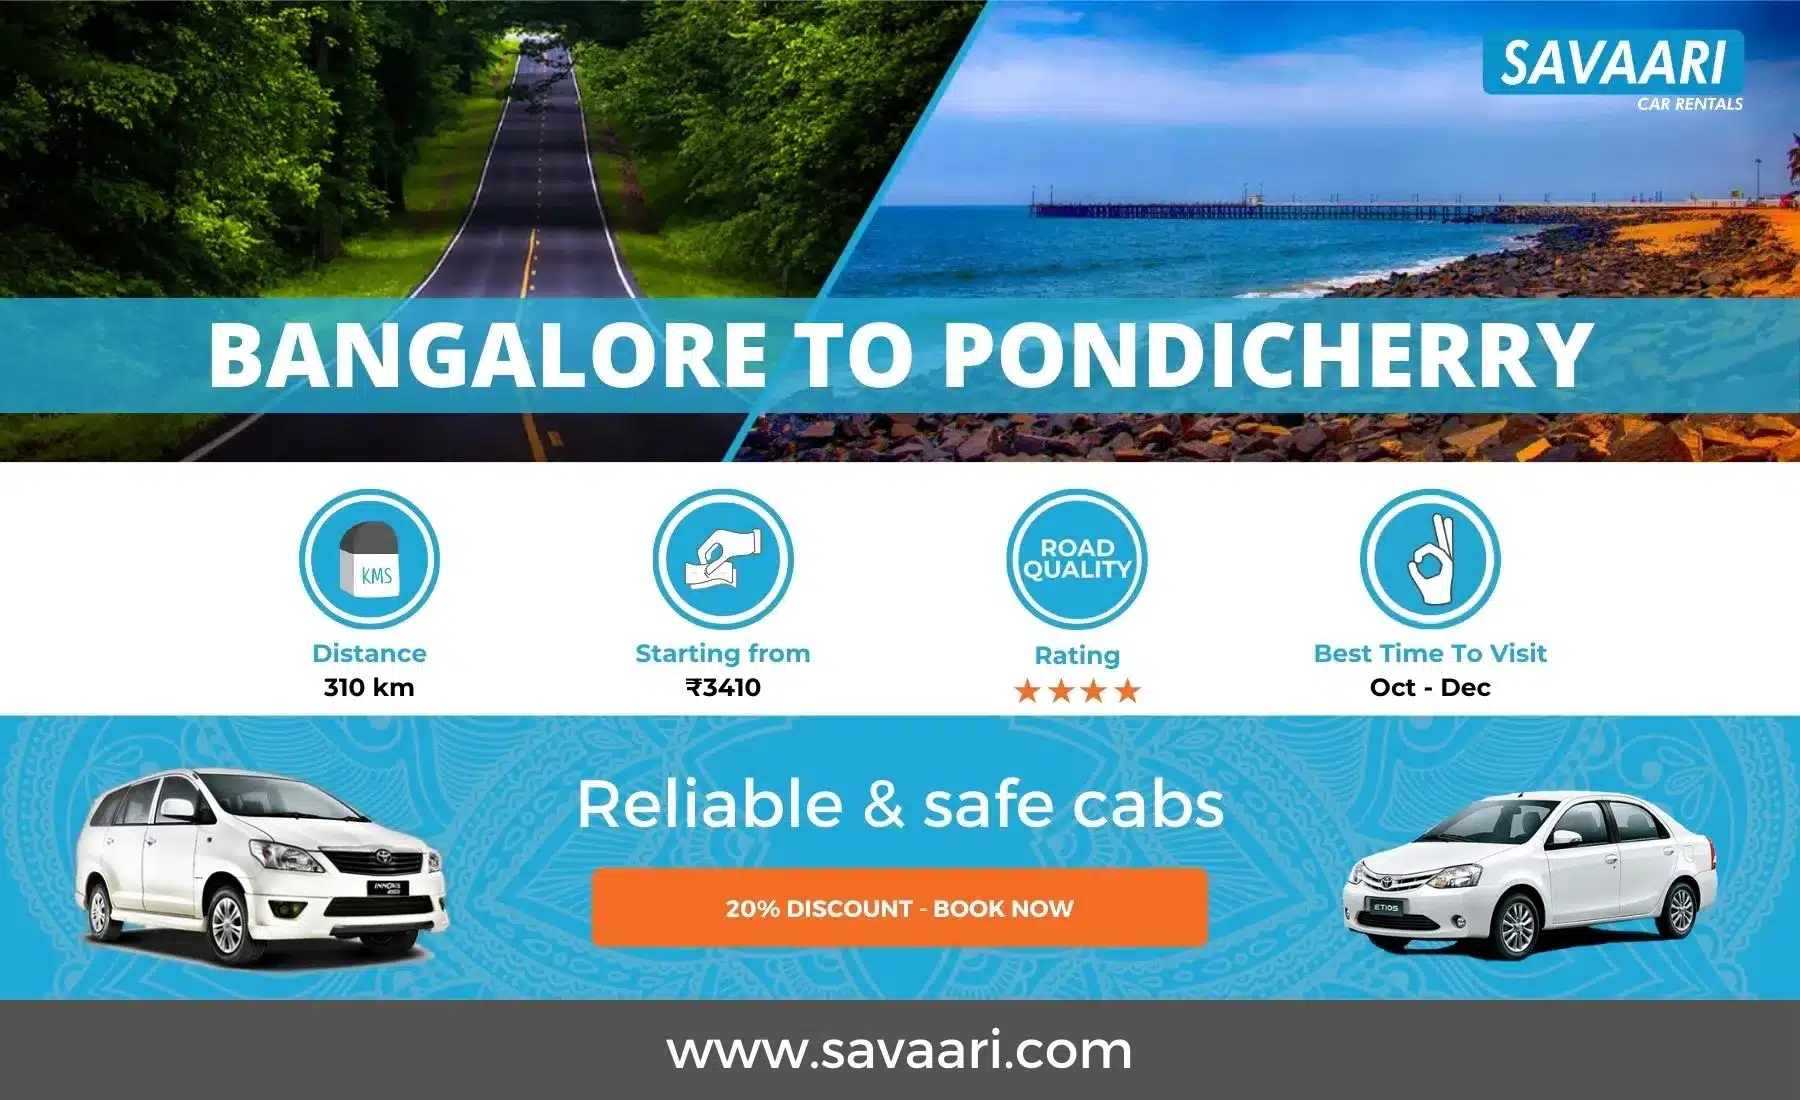 Bangalore to Pondicherry by road information